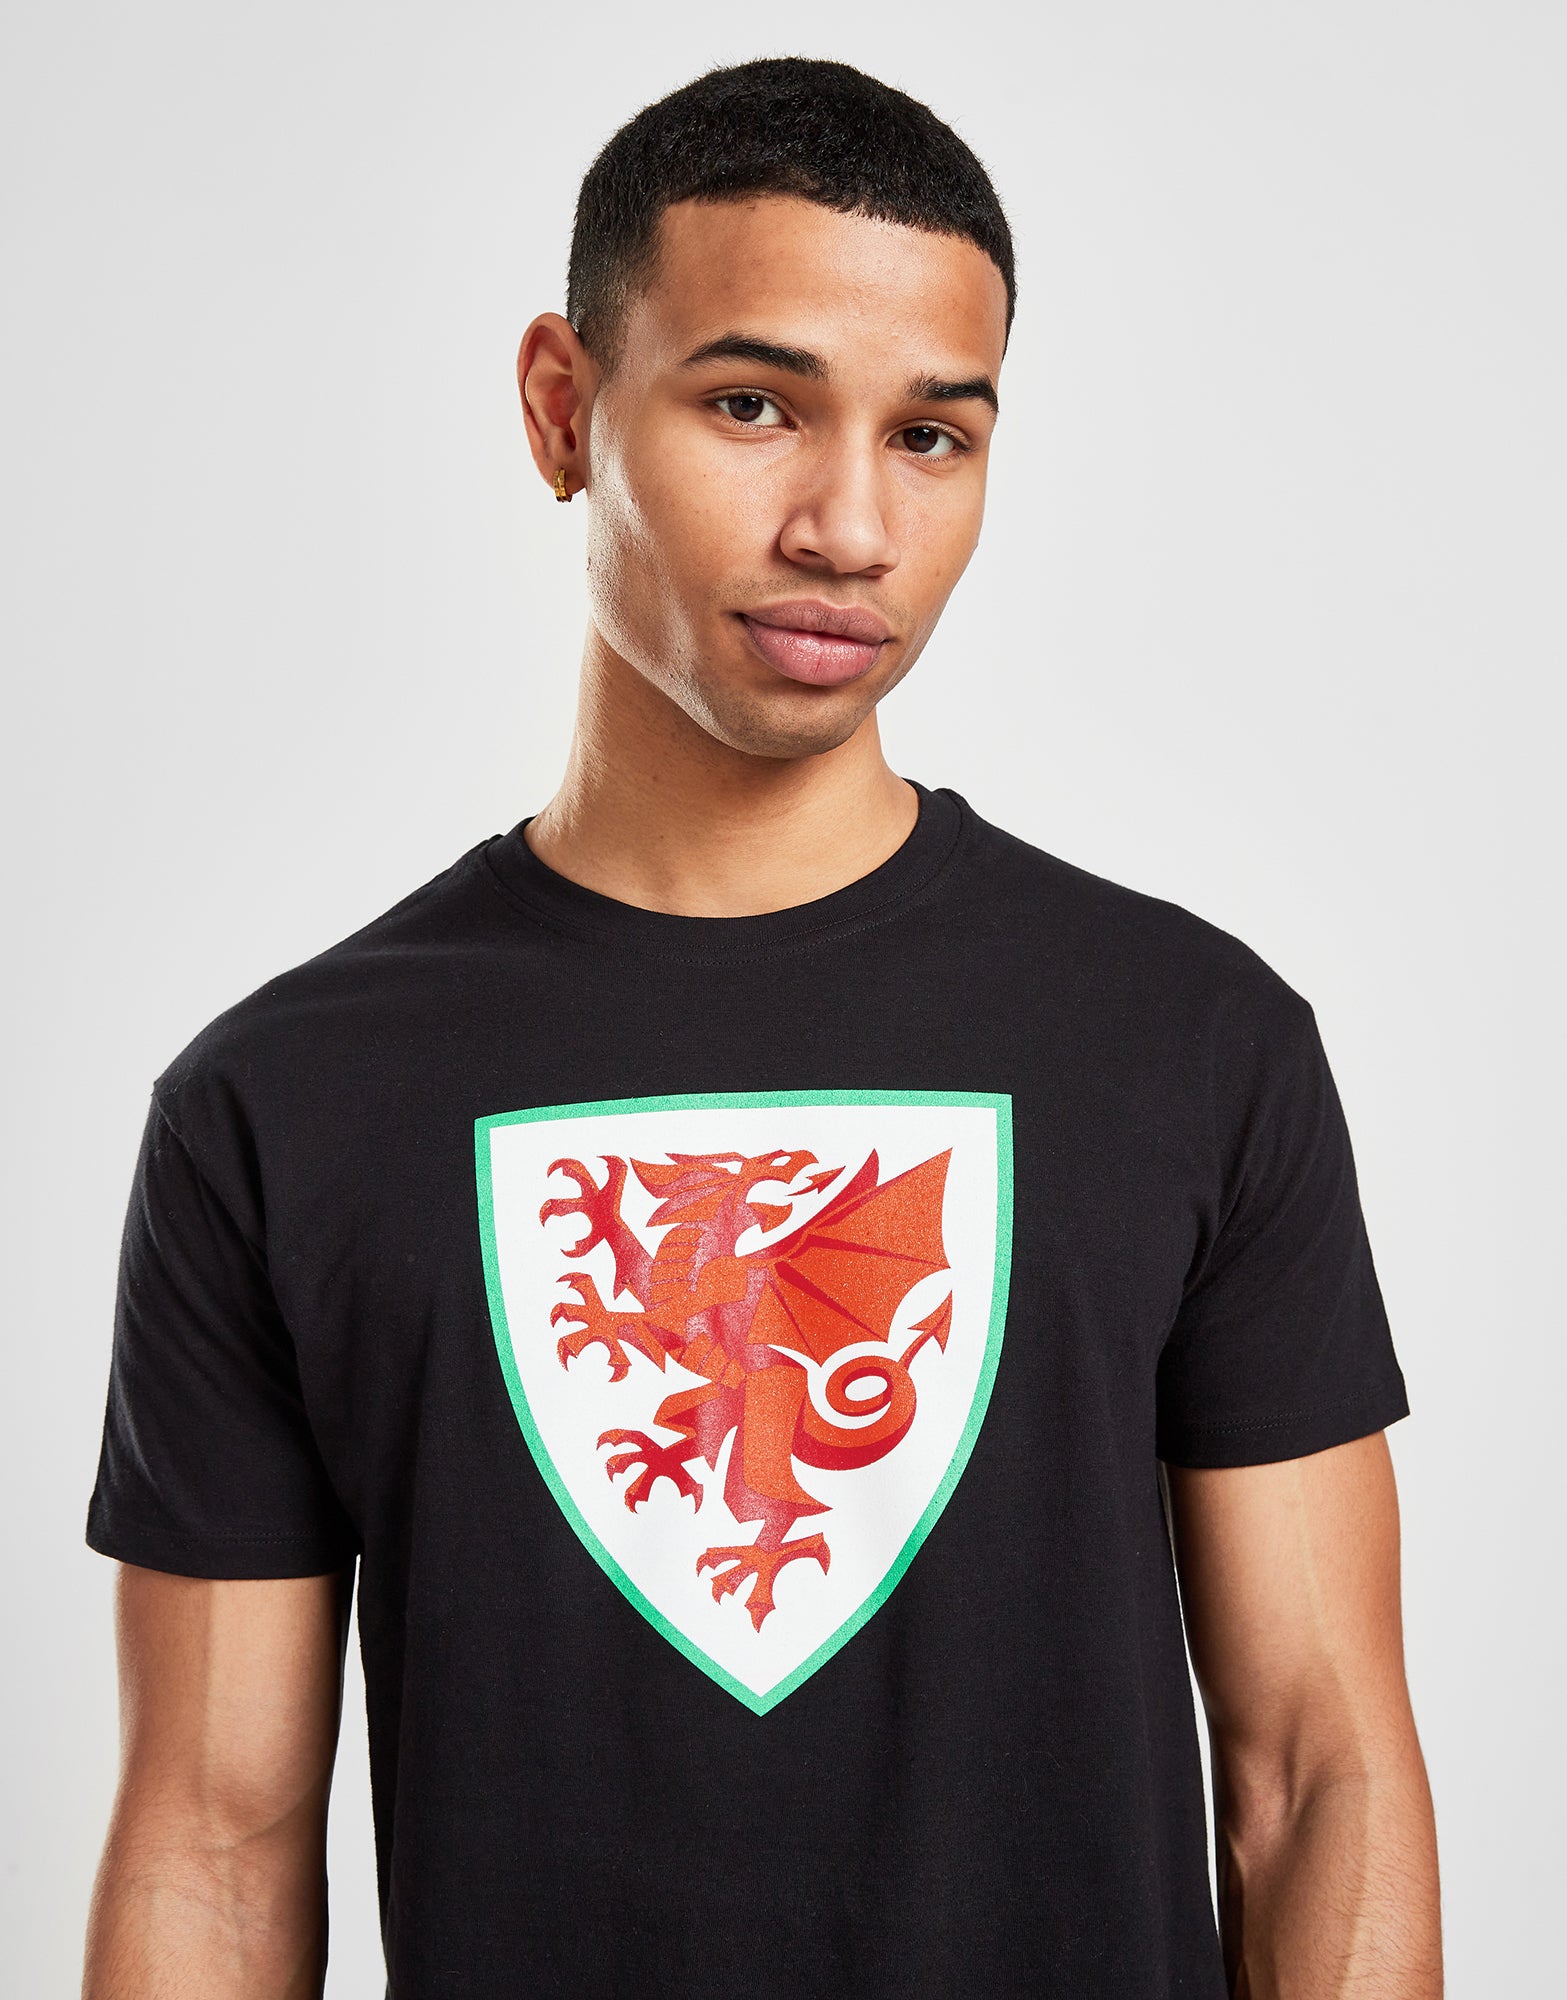 Official Team Wales Crest T-Shirt - Black - The World Football Store